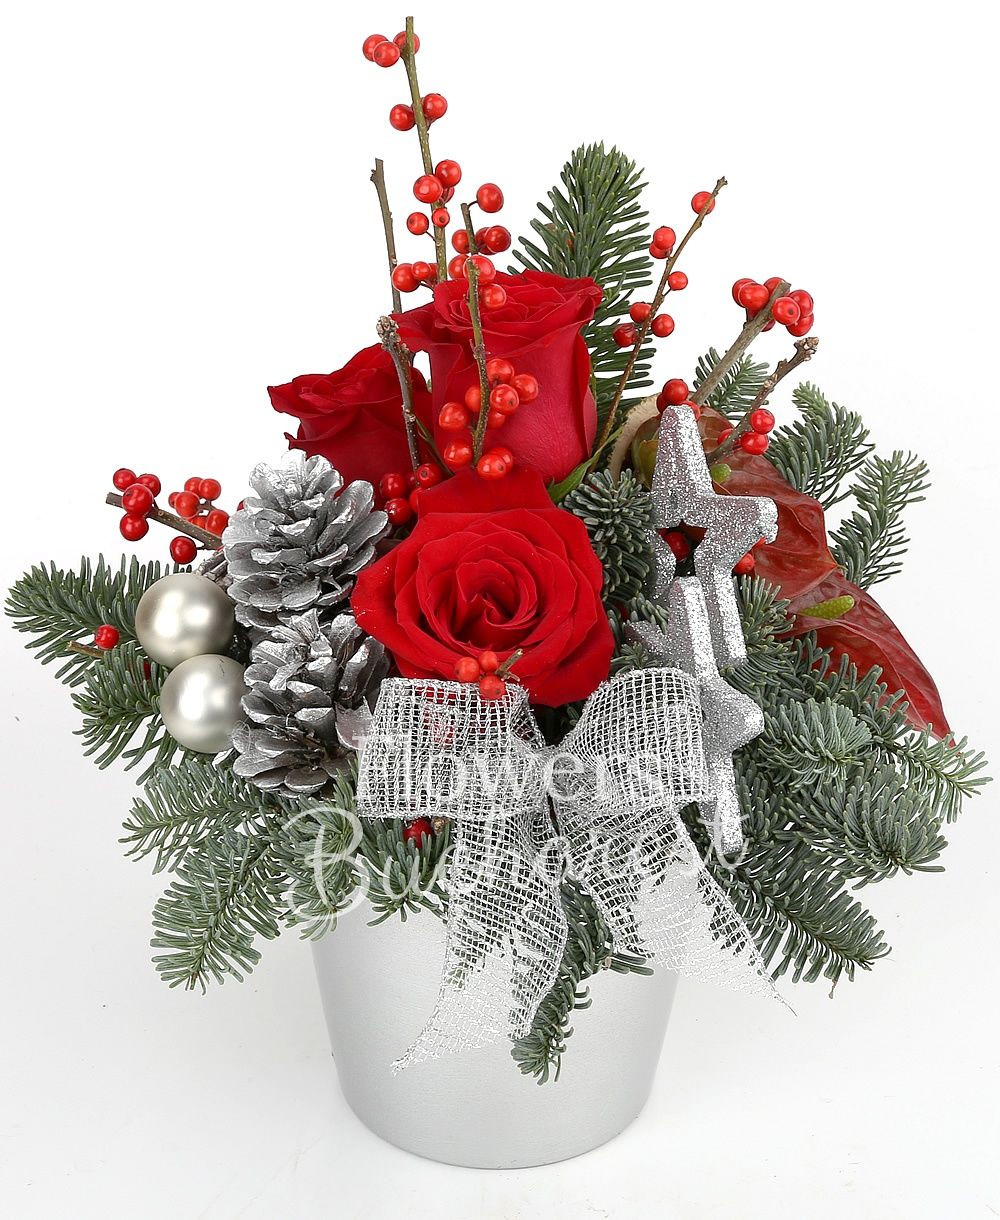 3 red roses, 2 red anthurium, globes, stars, dried orange slices, greenery